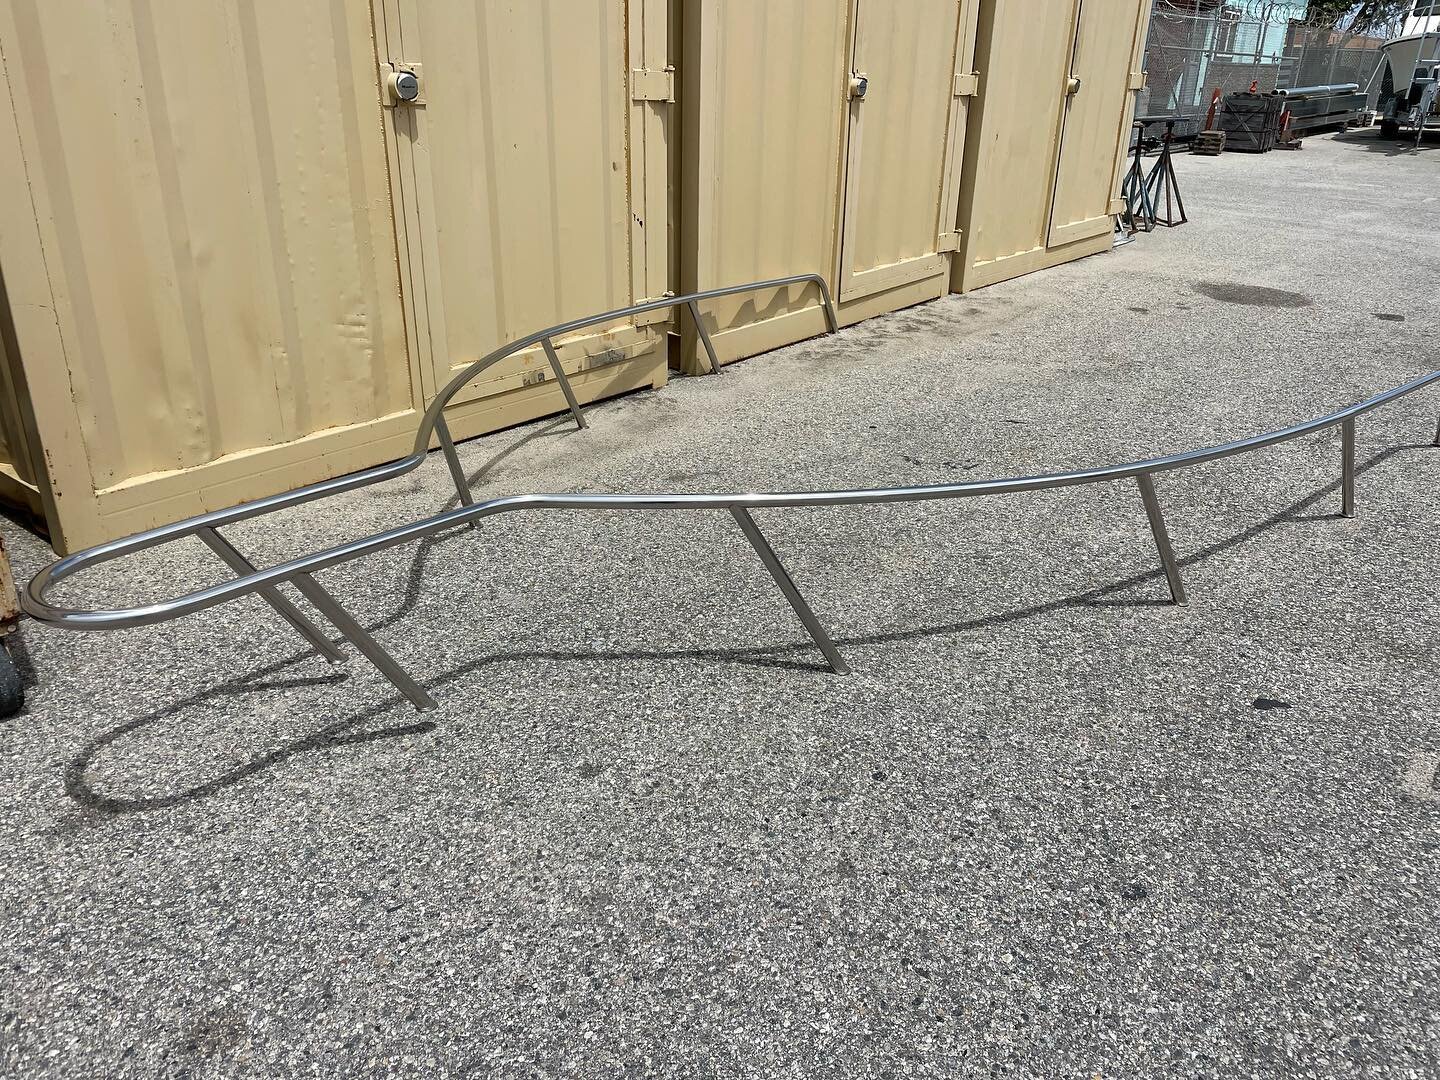 2120 PARKER stainless bow rail  for sale $750.00 OBO  805 432-8257